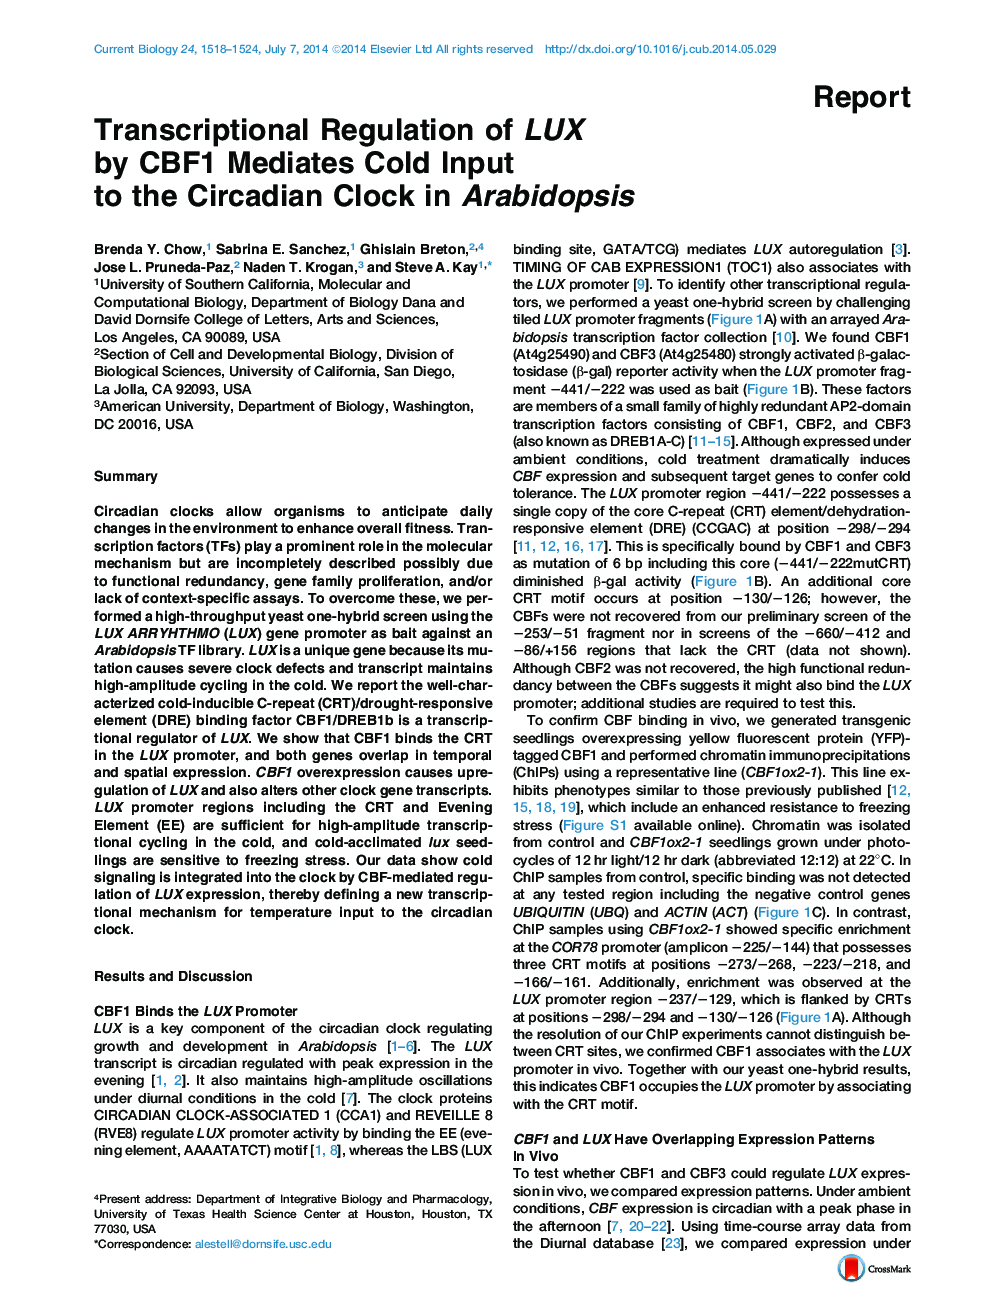 Transcriptional Regulation of LUX by CBF1 Mediates Cold Input to the Circadian Clock in Arabidopsis